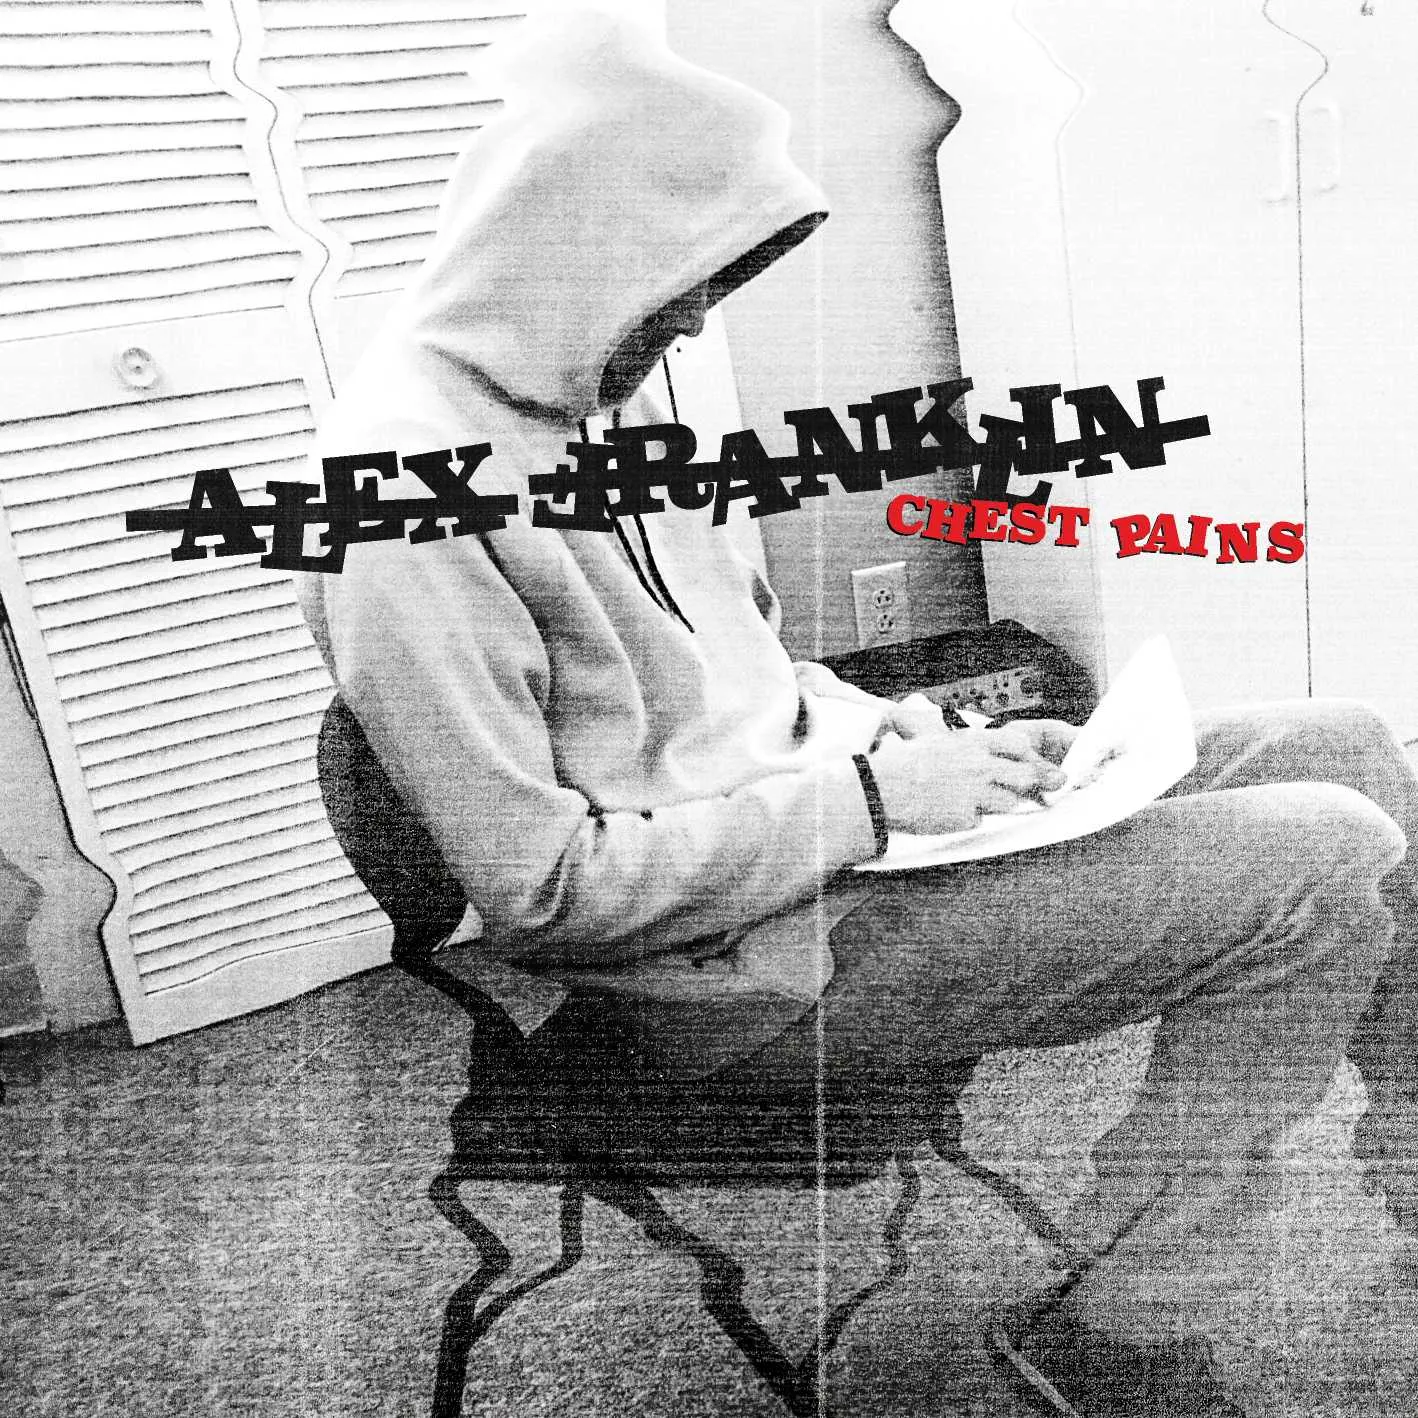 Album cover for “Chest Pains” by Alex Franklin